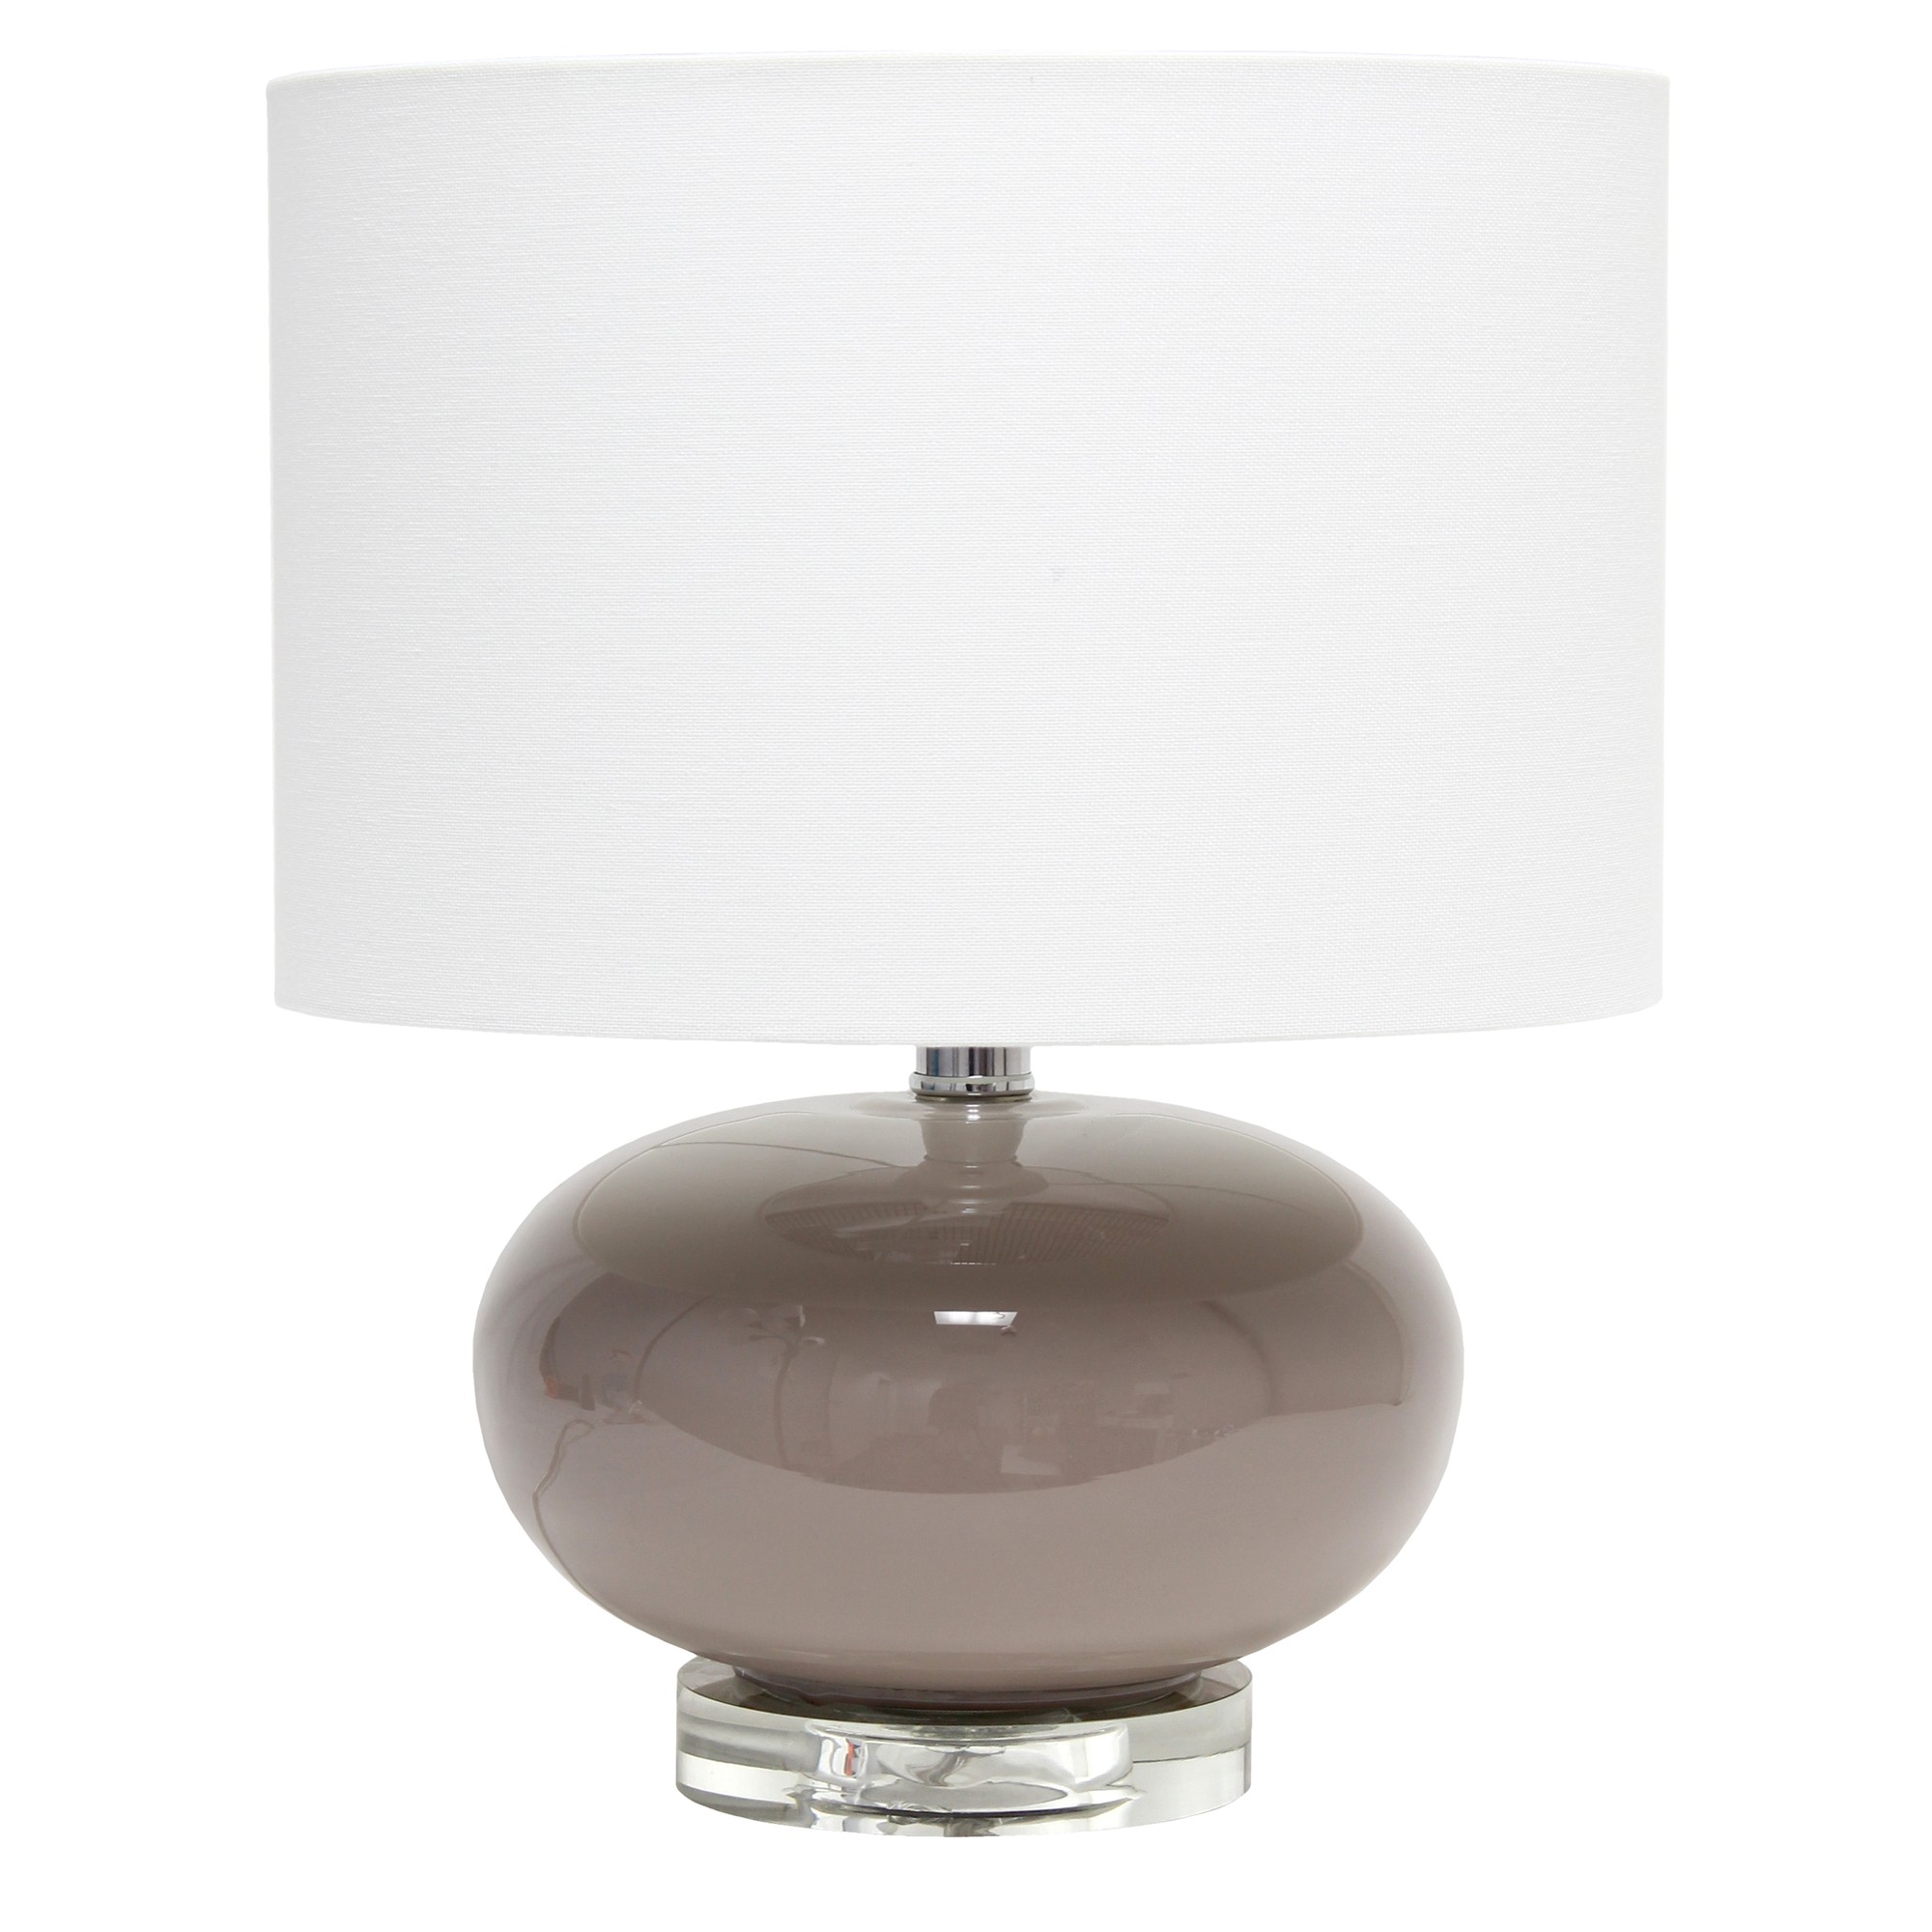 Lalia Home 15.25" Modern Ovaloid Glass Bedside Table Lamp with White Fabric Shade, Gray